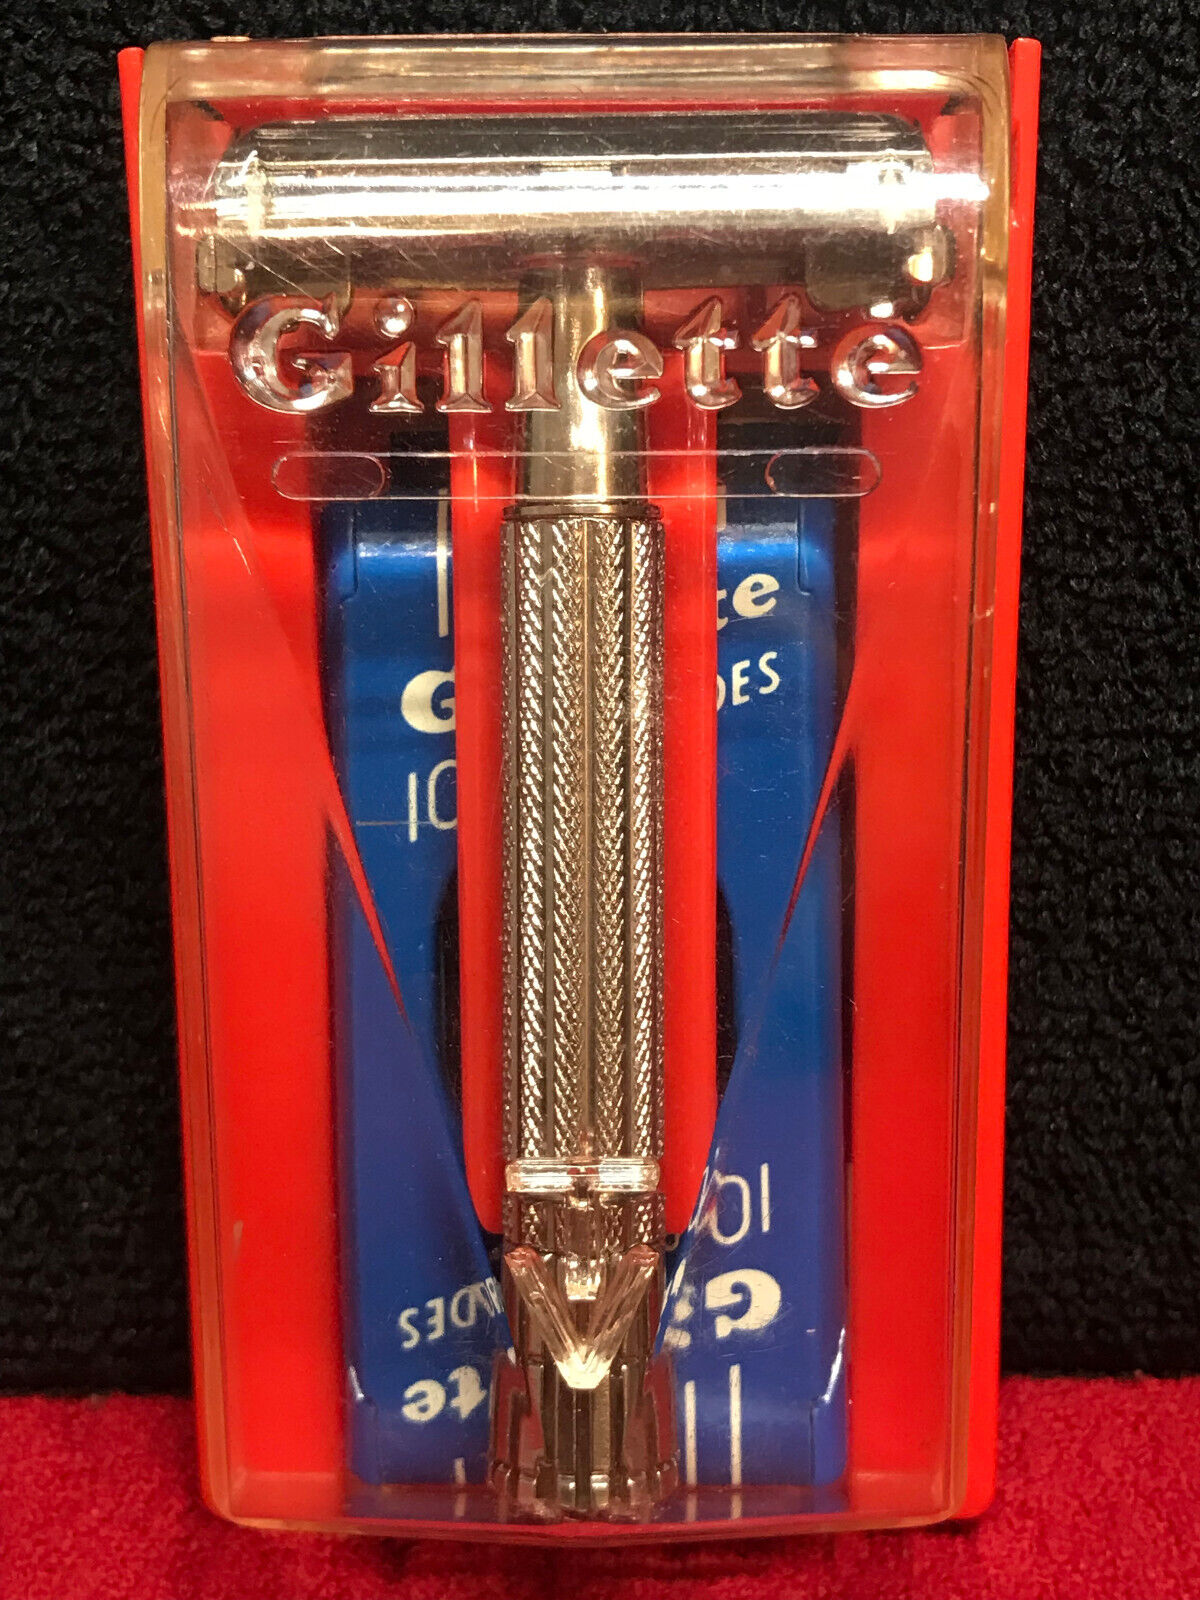 Beautiful NM Condition 1958 Gillette TV Safety Razor - Complete Set